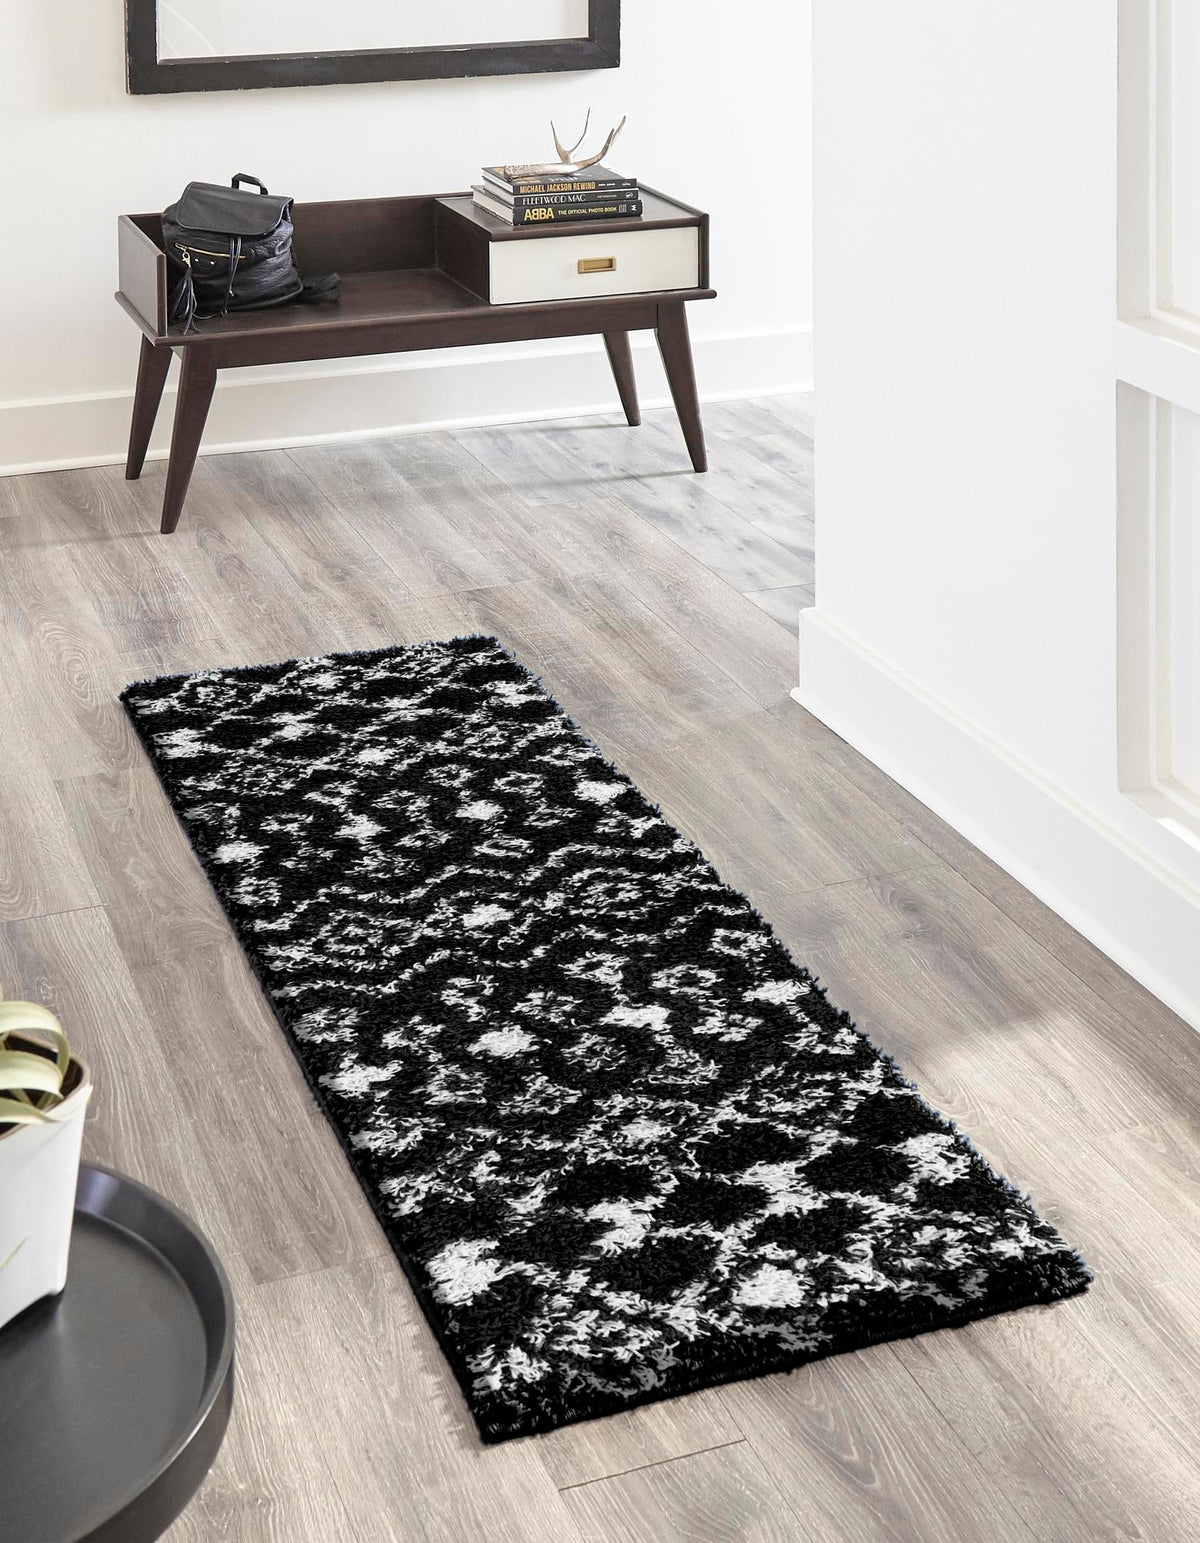 Berber Lattice Shag Collection Area Rug - Atlas (Black and White) Runner Black and White  lifestyle 0